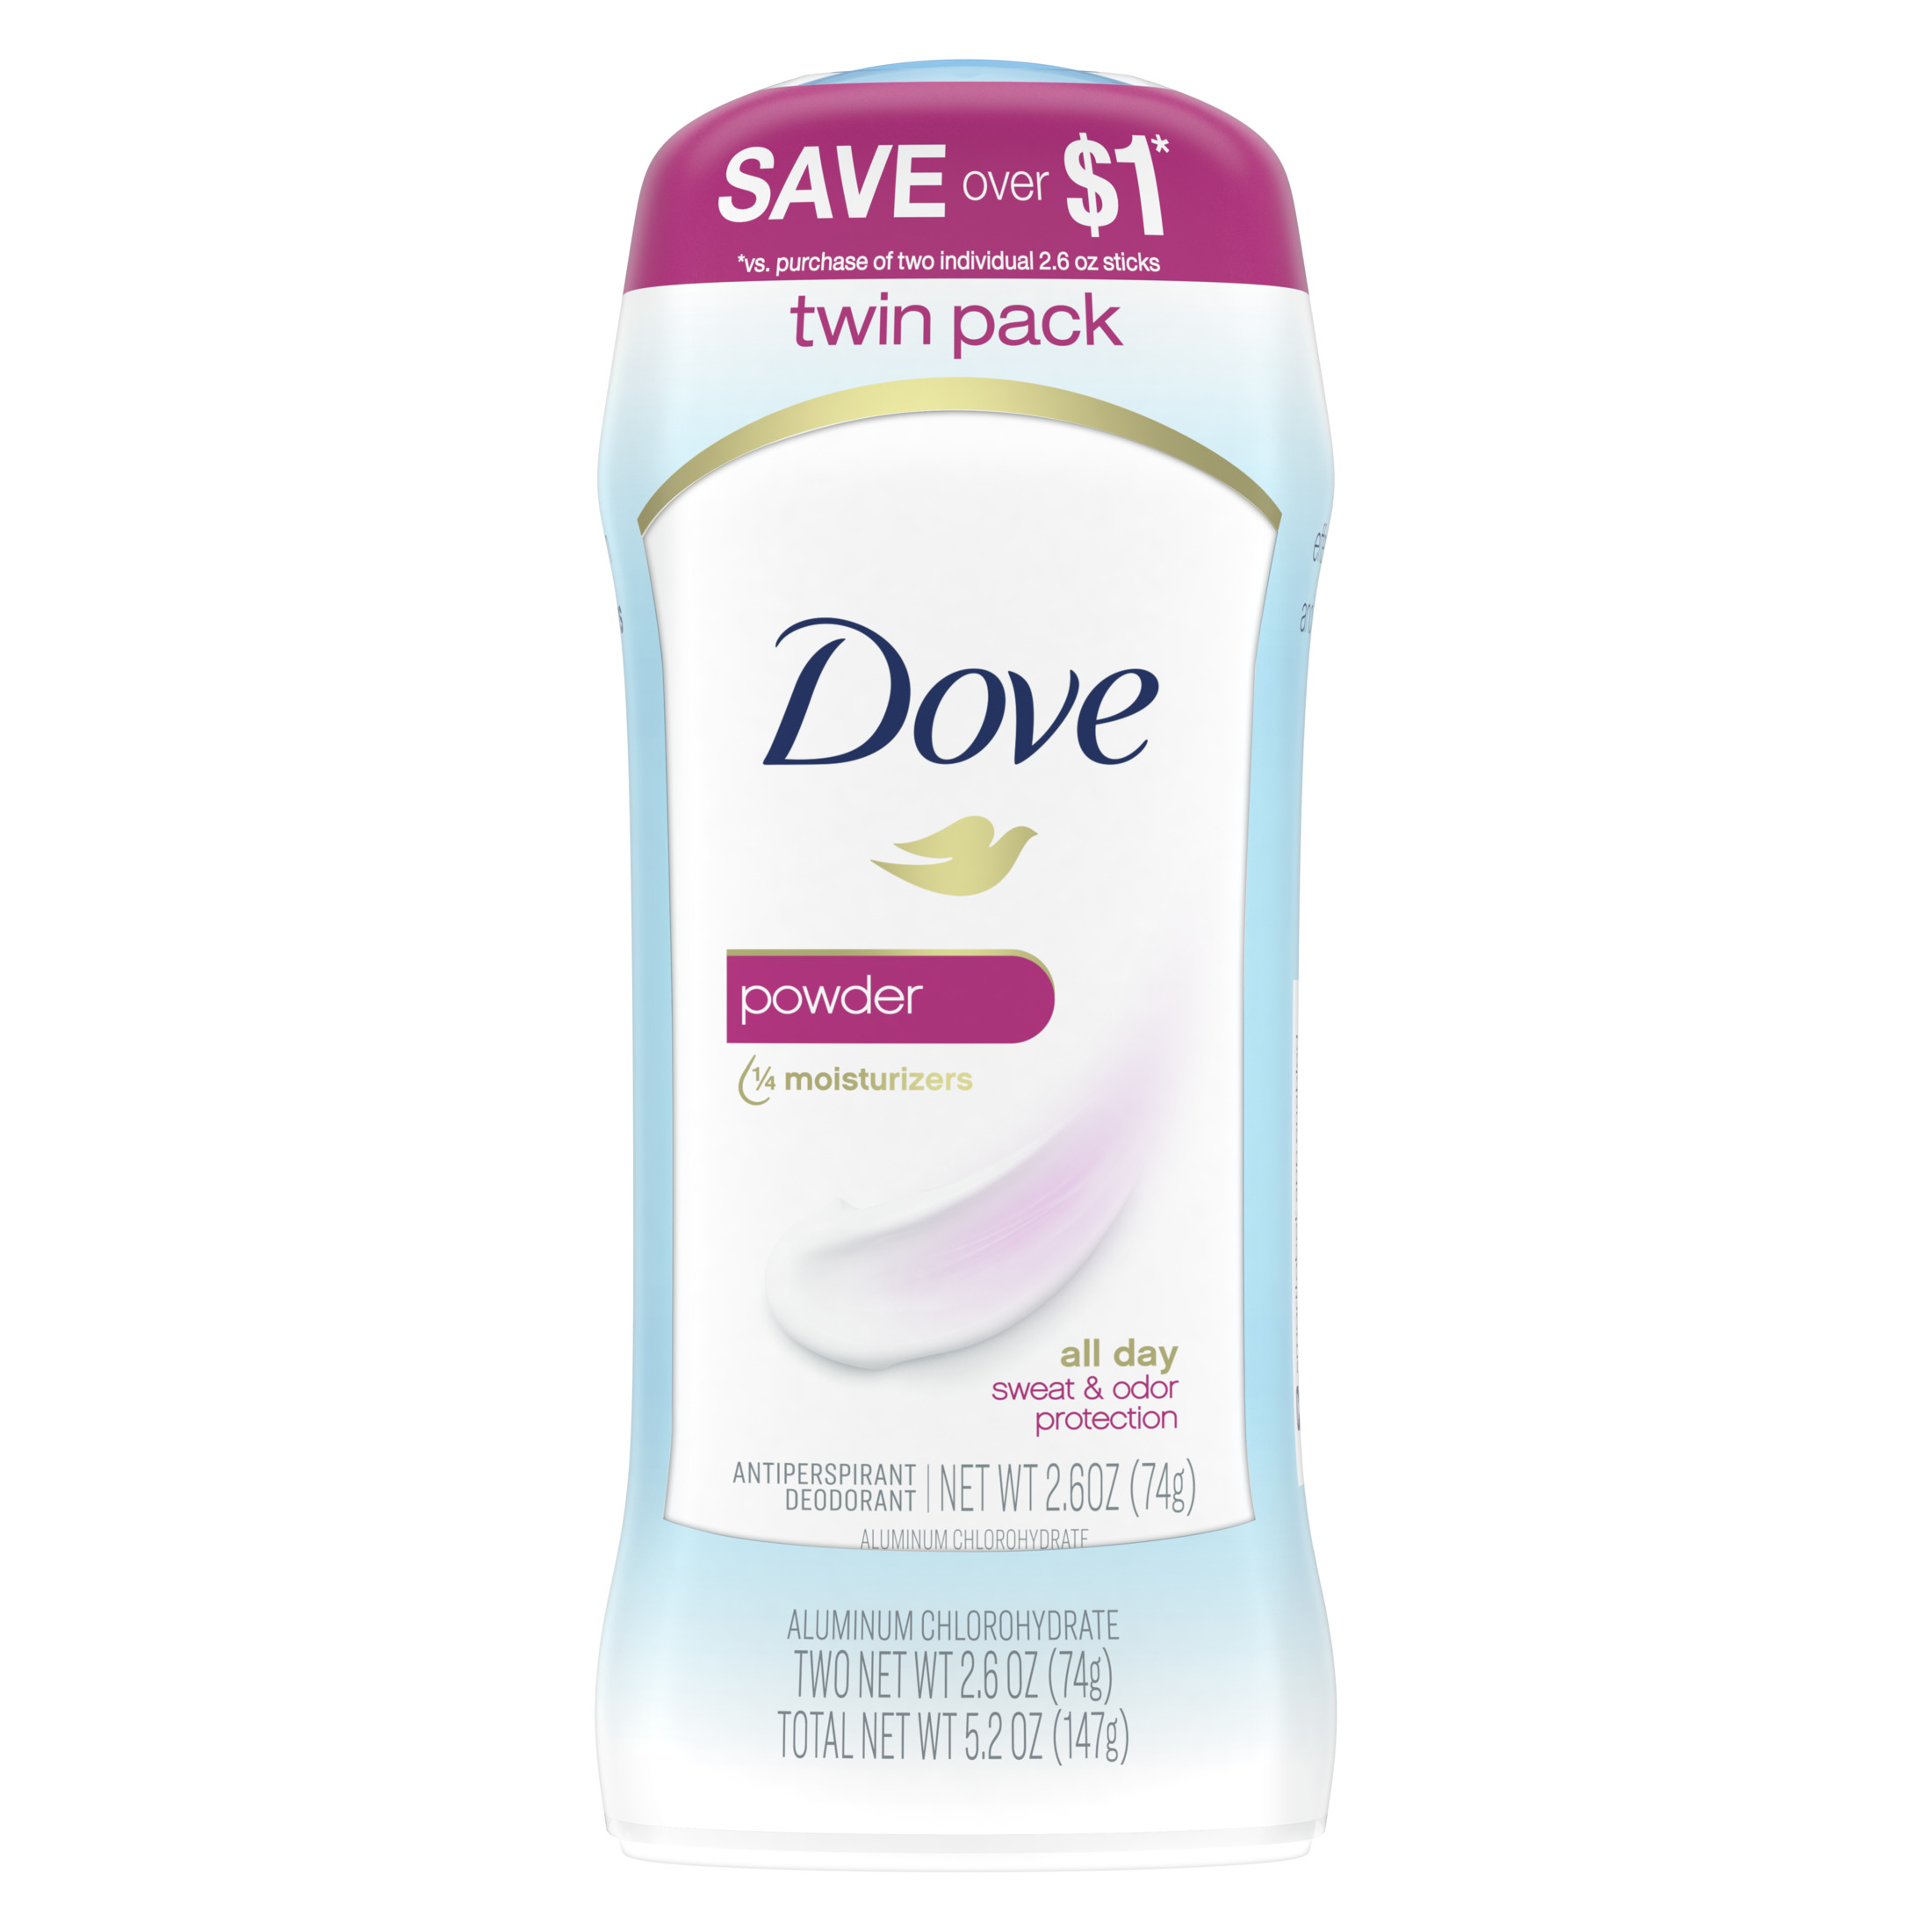 Dove Sweat and Odor Protection Women's Antiperspirant Deodorant Stick Twin Pack, Powder, 2.6 oz - image 1 of 11